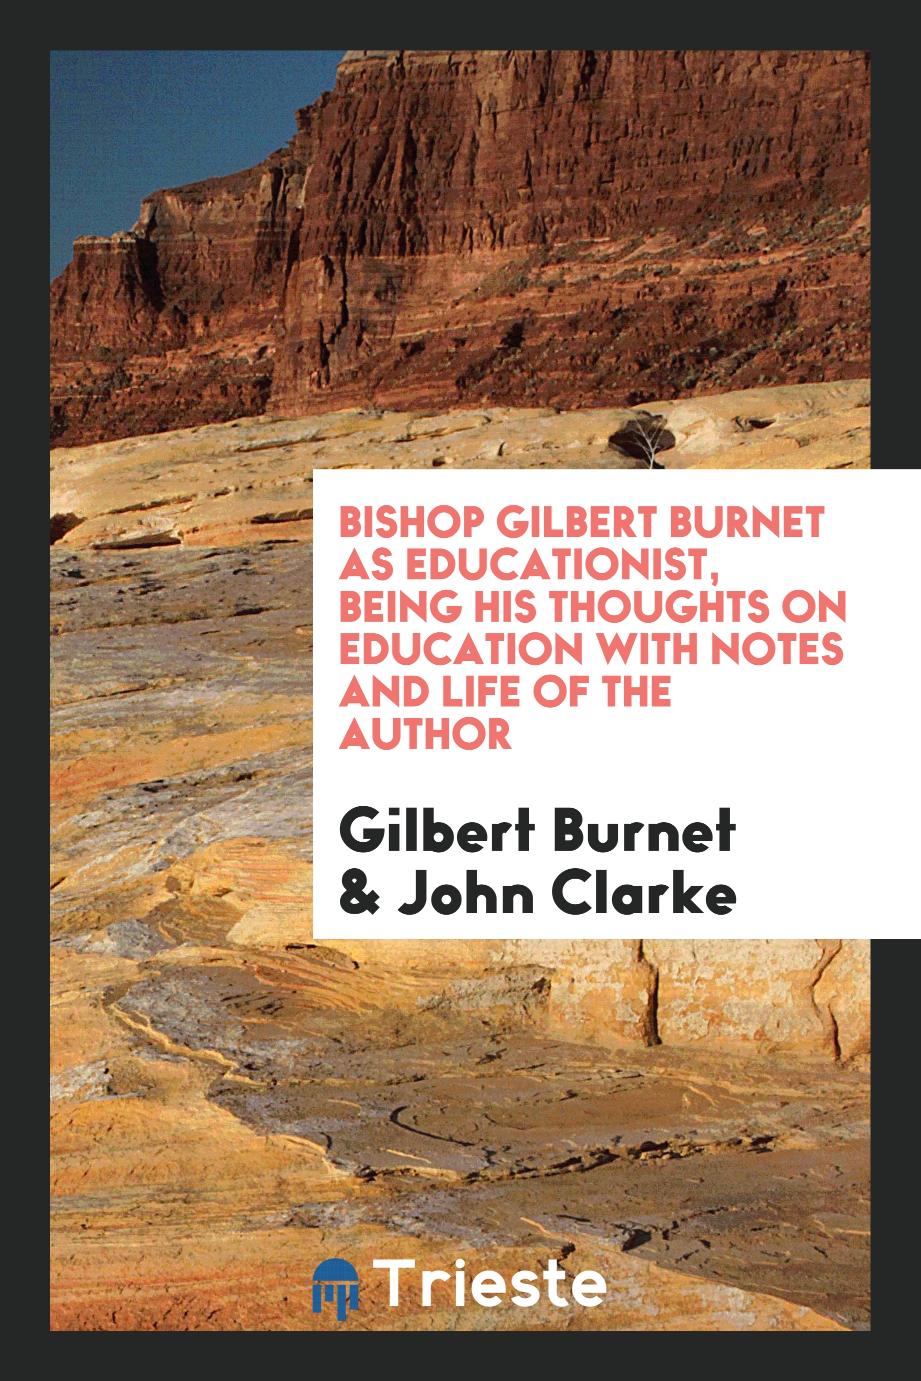 Bishop Gilbert Burnet as educationist, being his Thoughts on Education with notes and life of the author